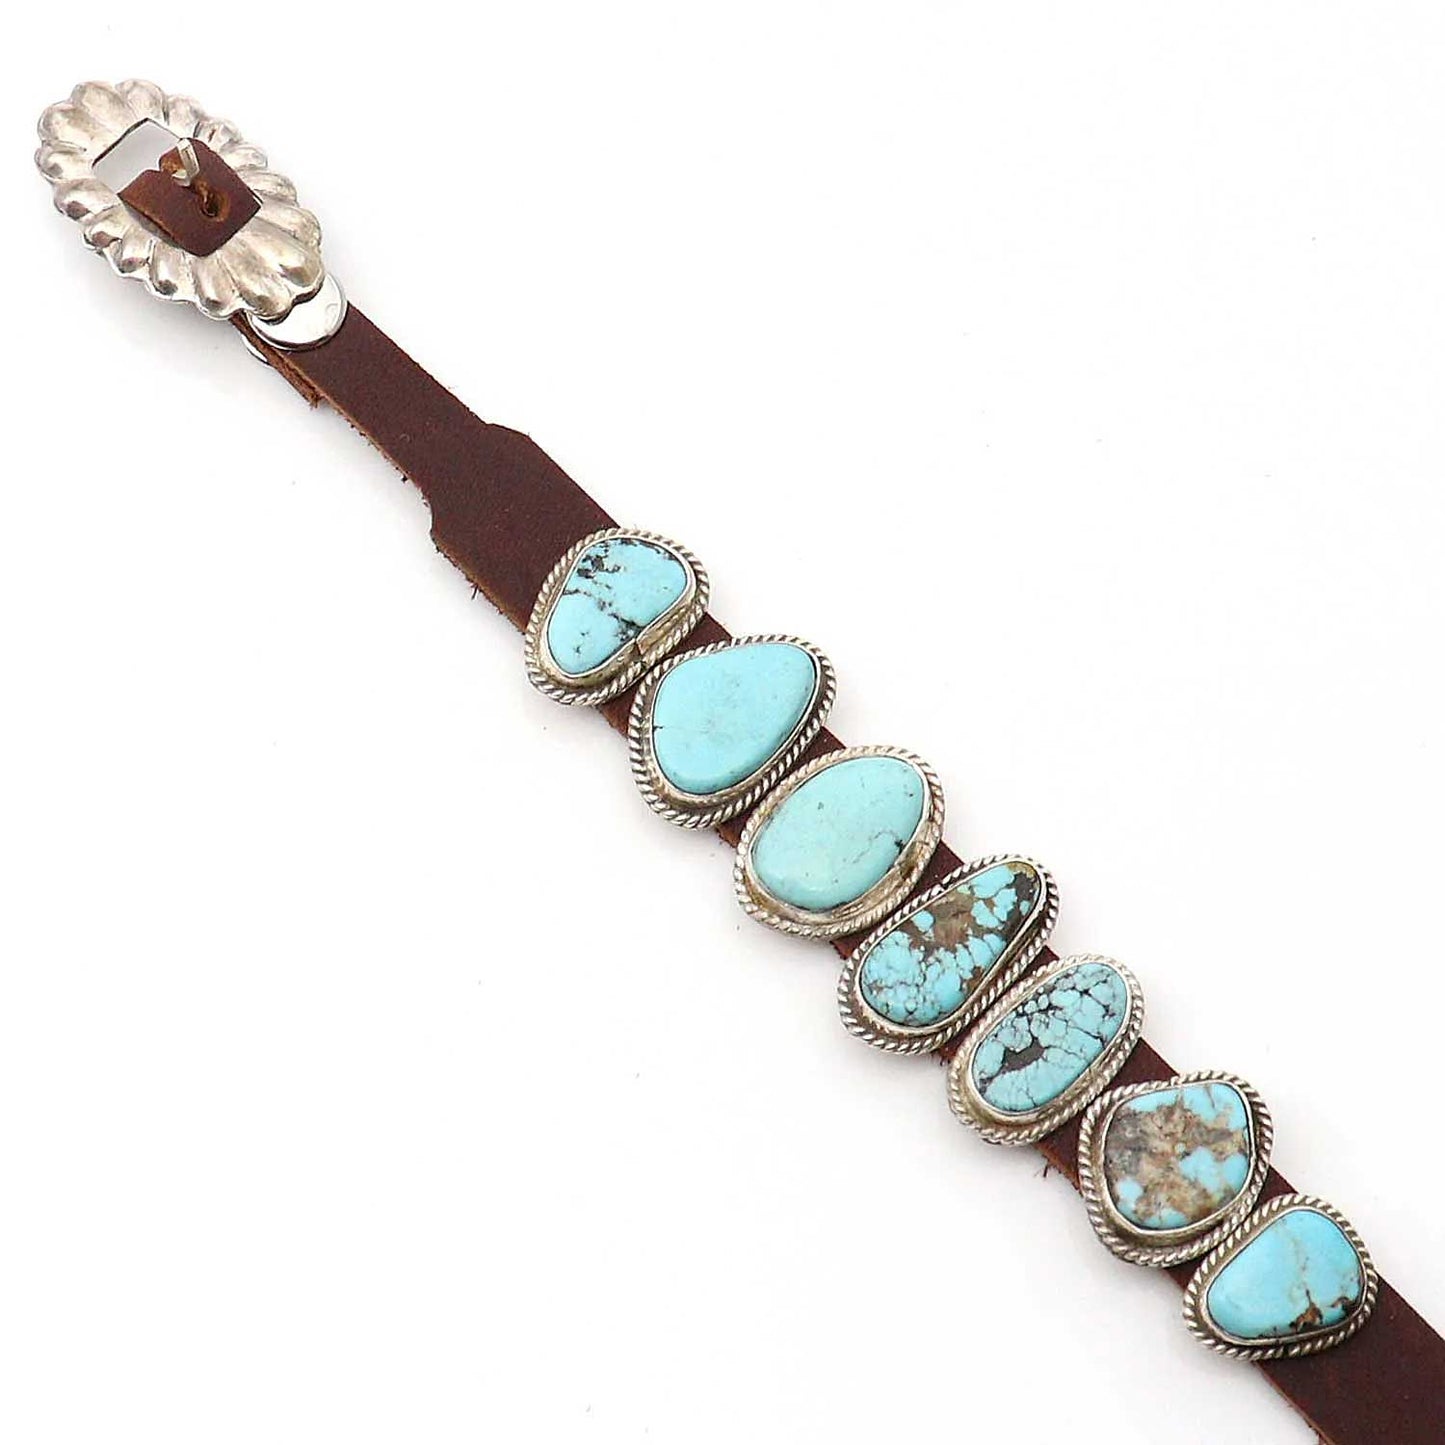 Turquoise & Leather Concho Bracelet by Rogers